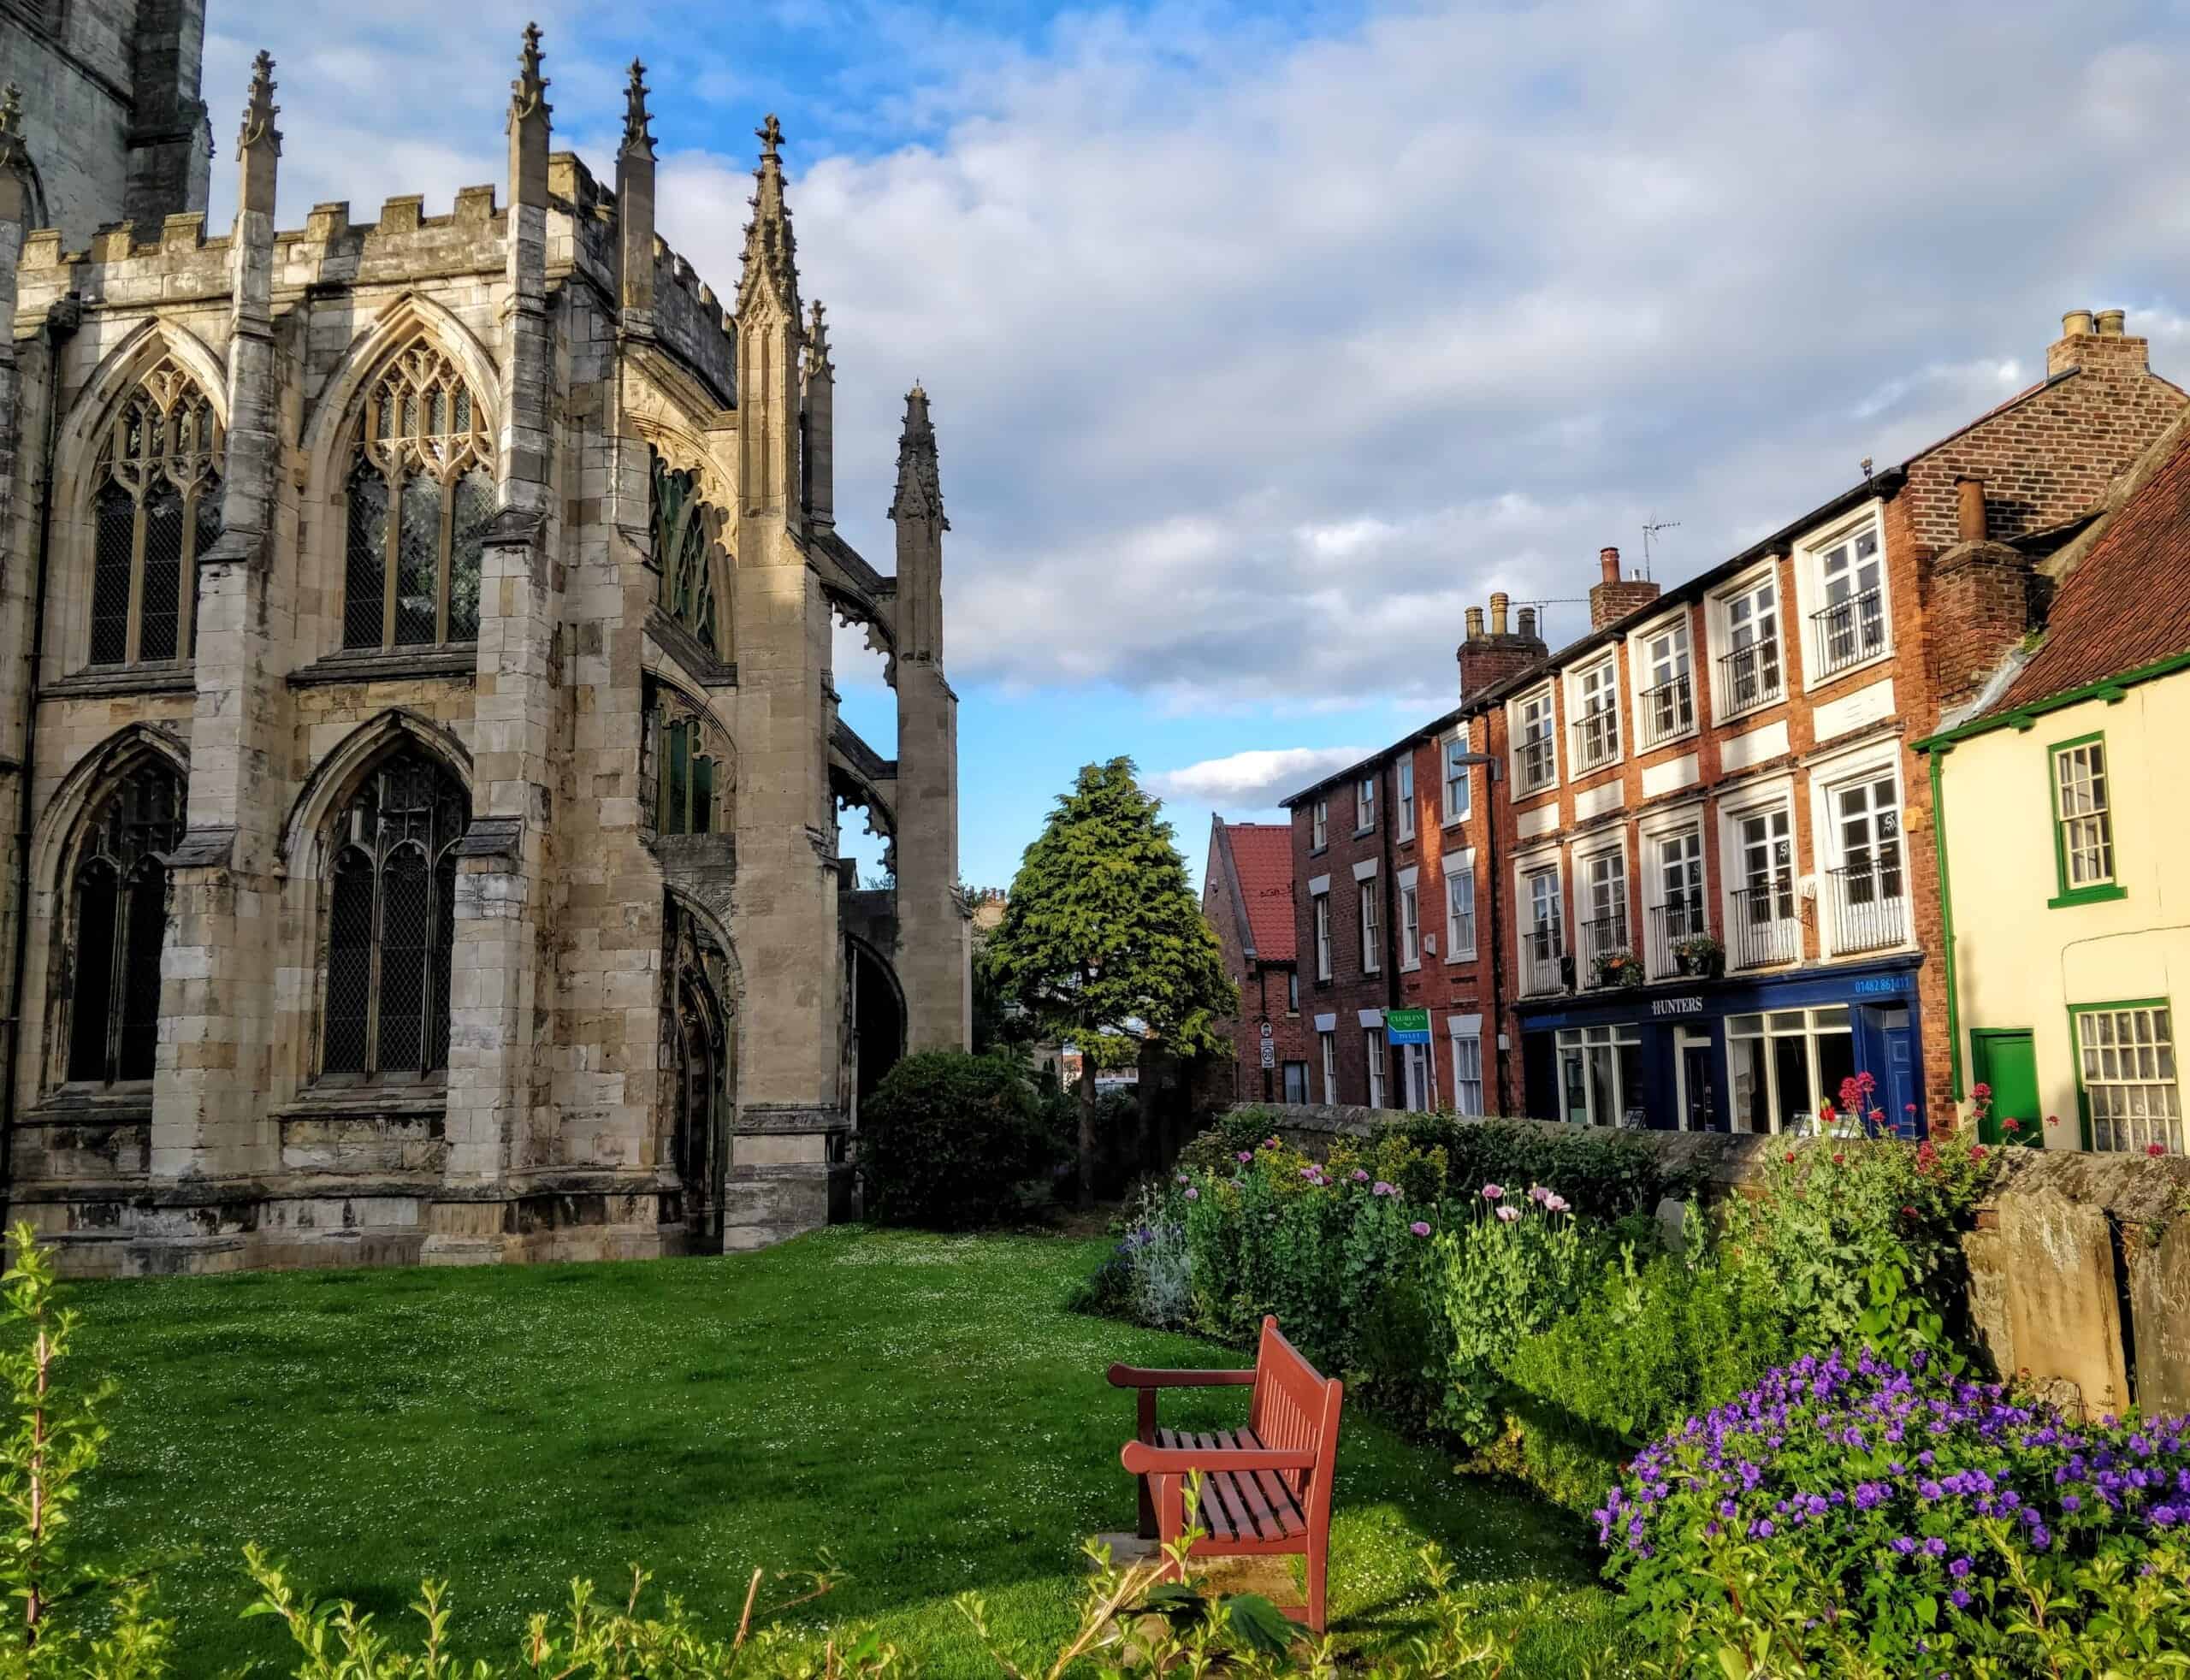 Visit Hull and East Yorkshire